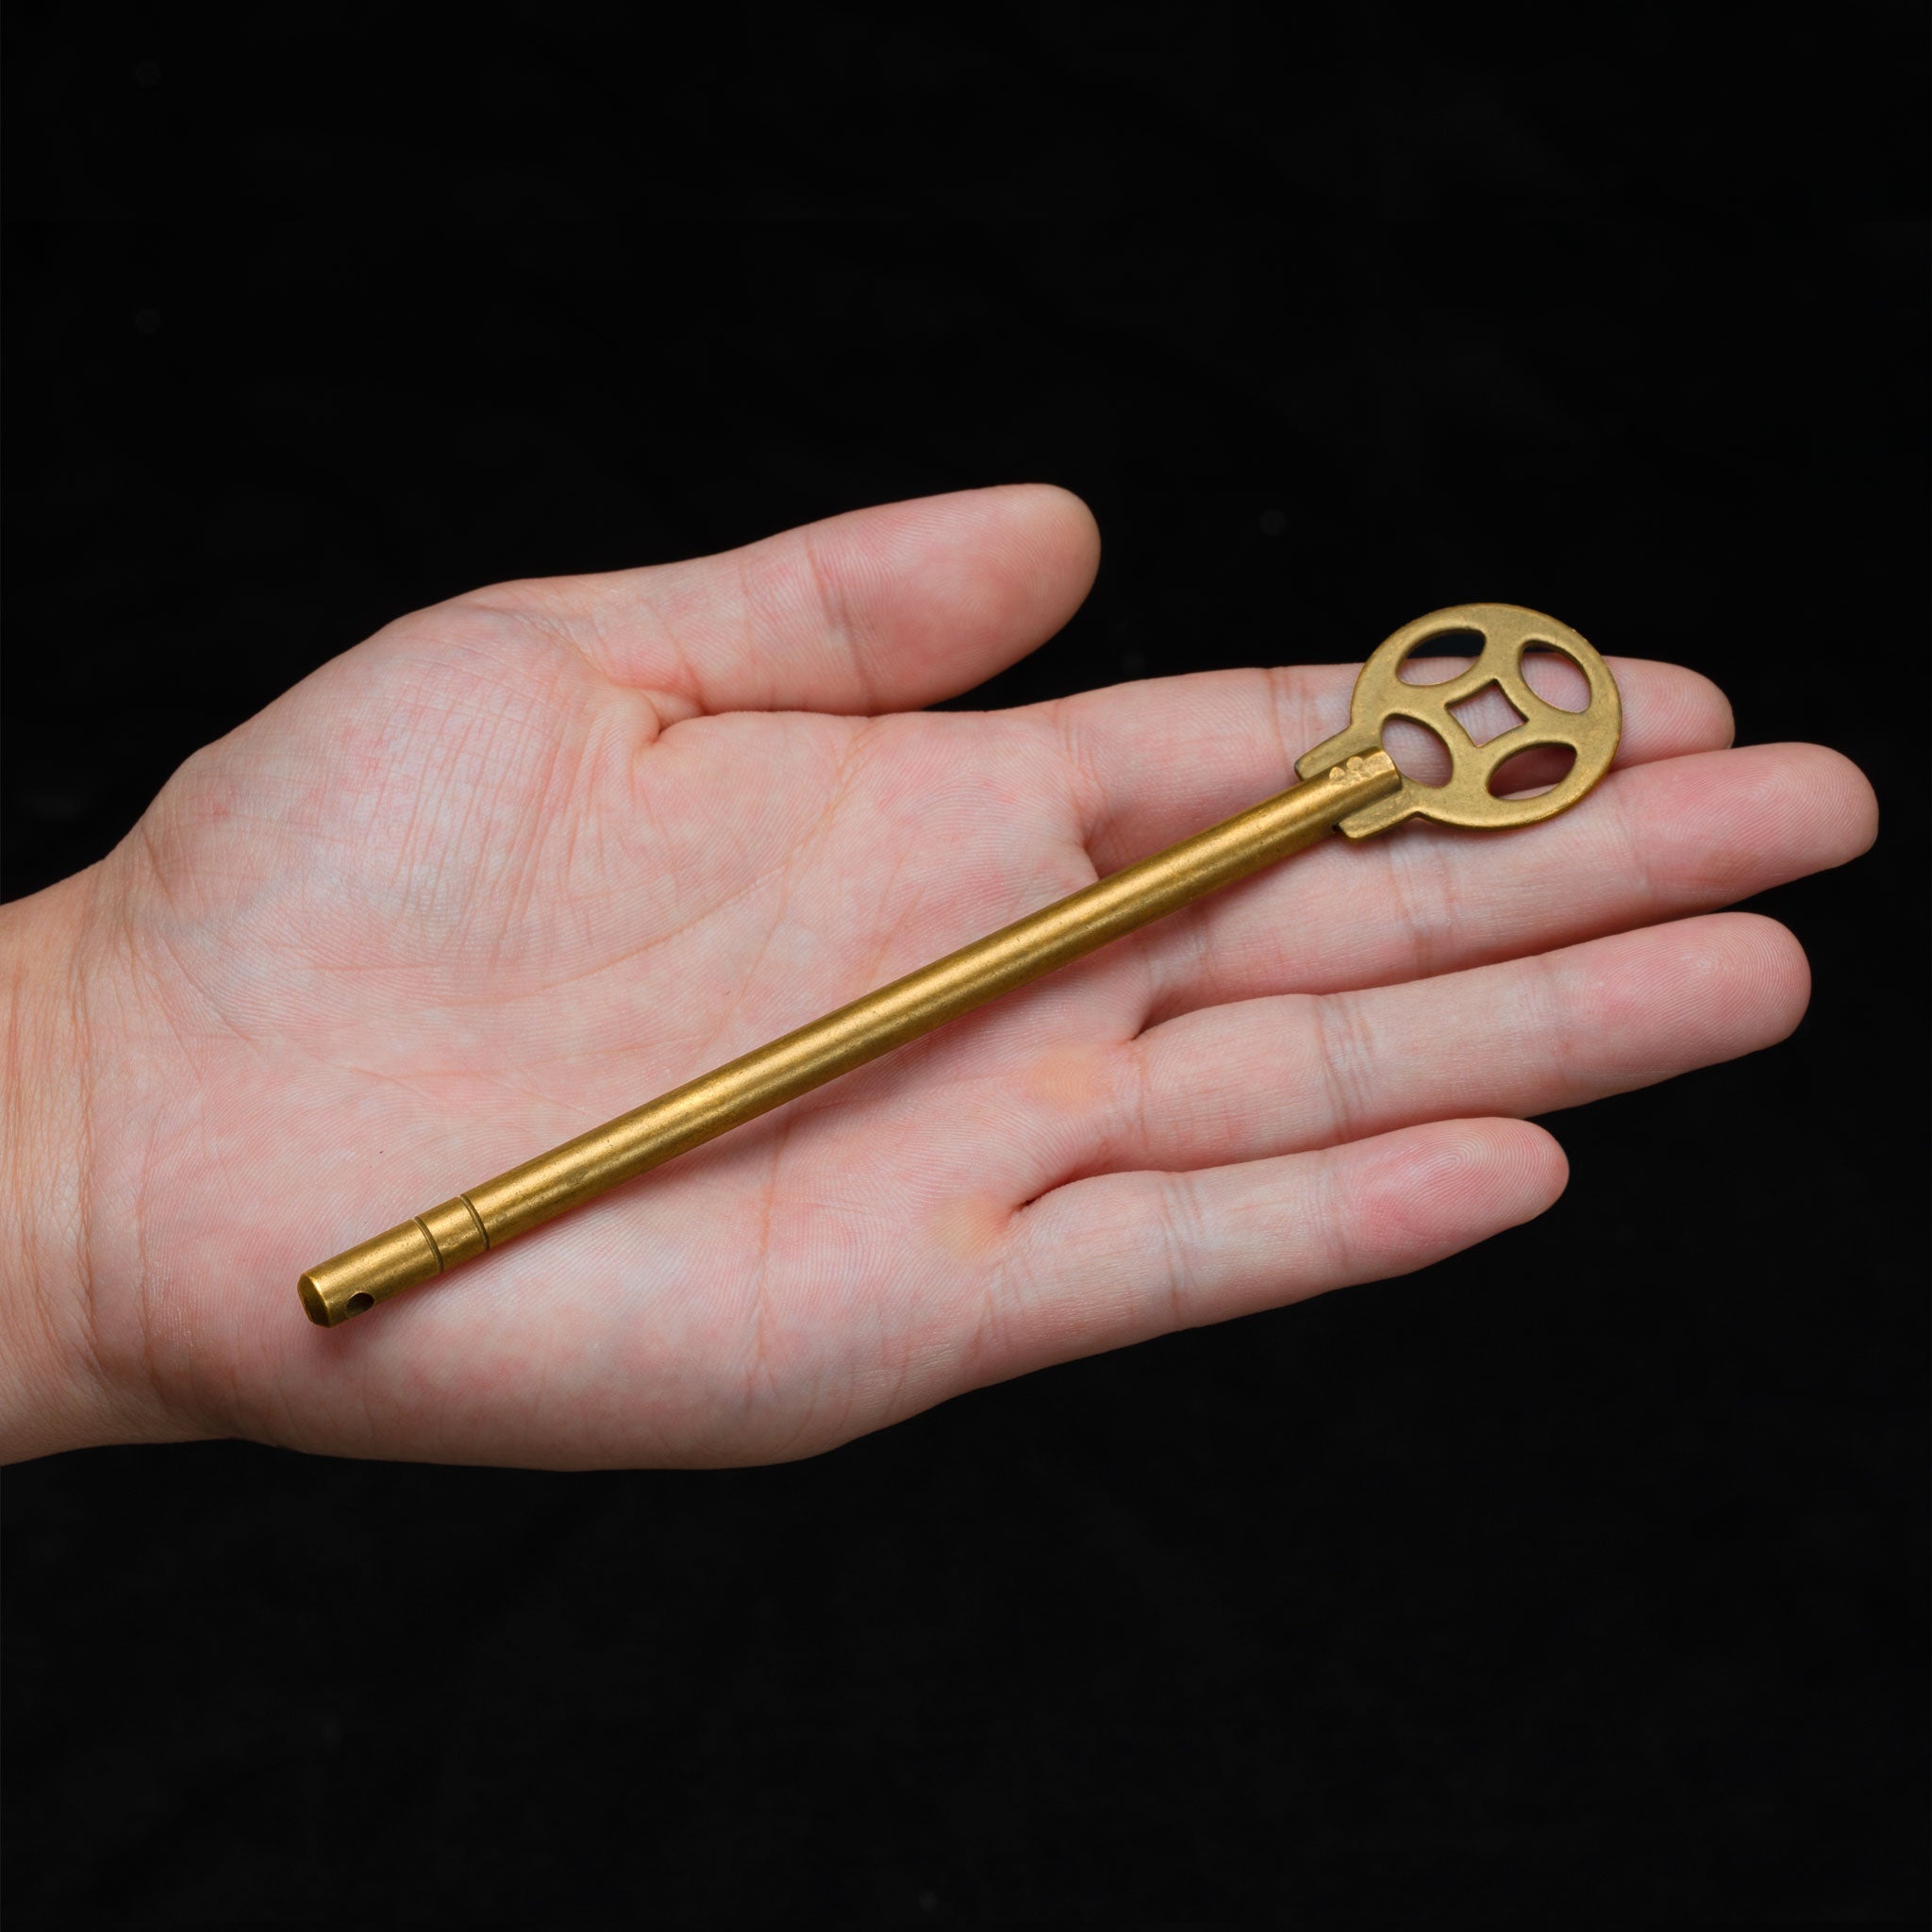 Money Coin Key 5.75" - Set of 2-Chinese Brass Hardware